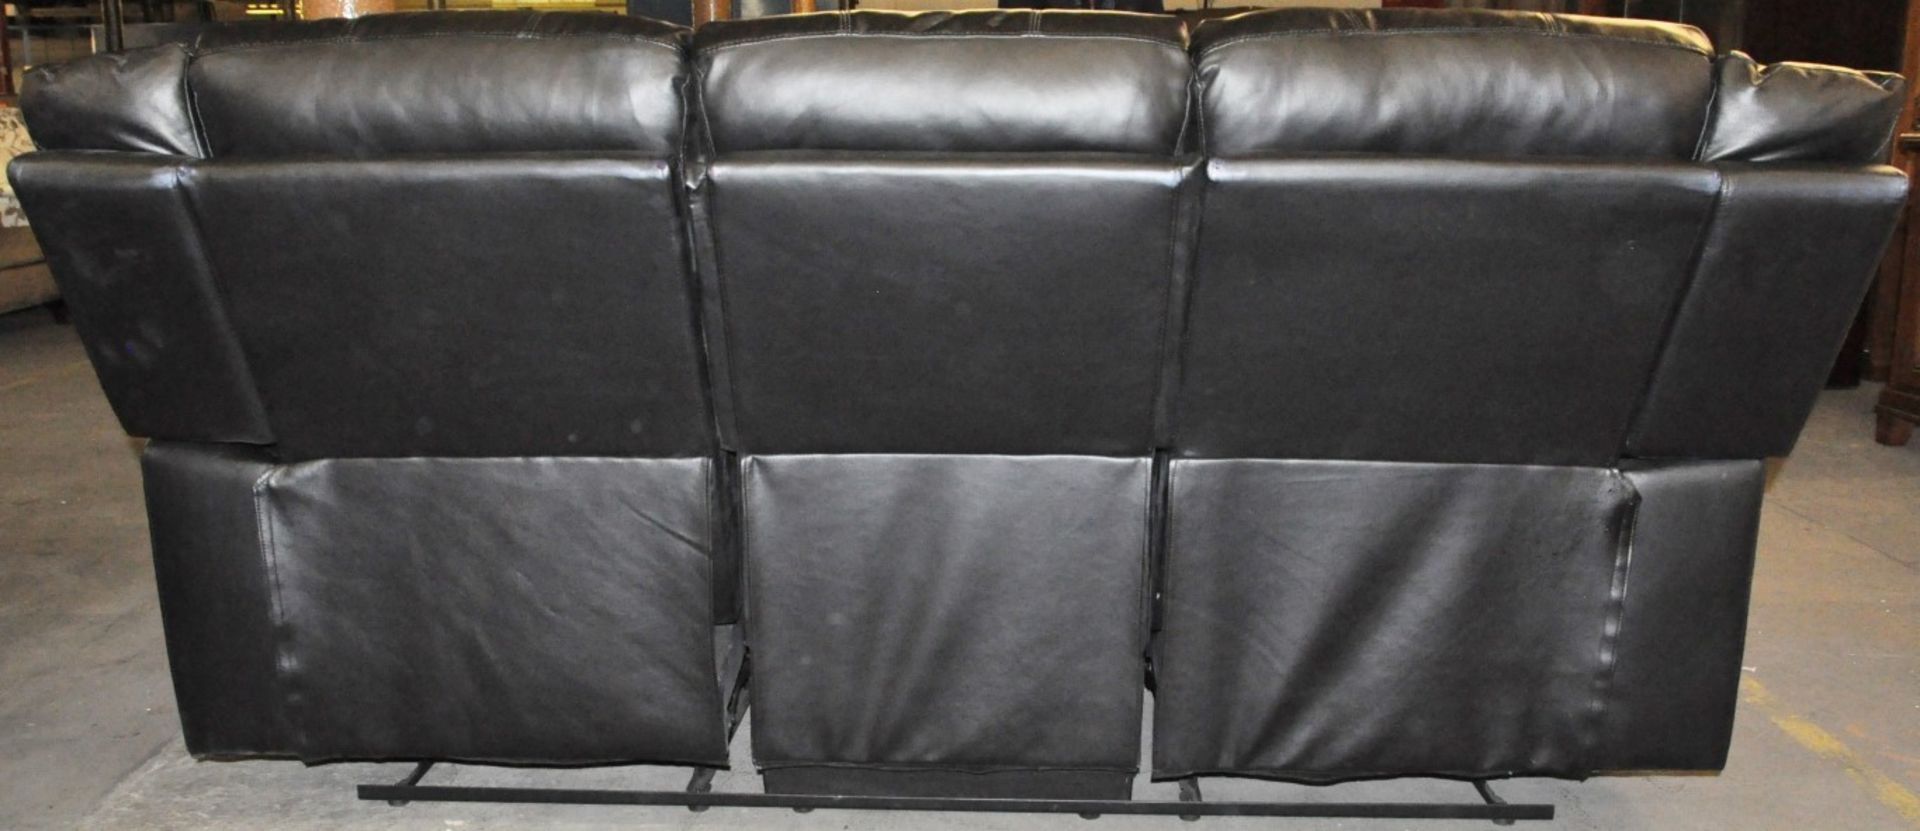 1 x Stylish Black Leather 3 Seater Sofa with Reclining Seat – RRP £1,299.00 - Banded Leather - Image 7 of 7